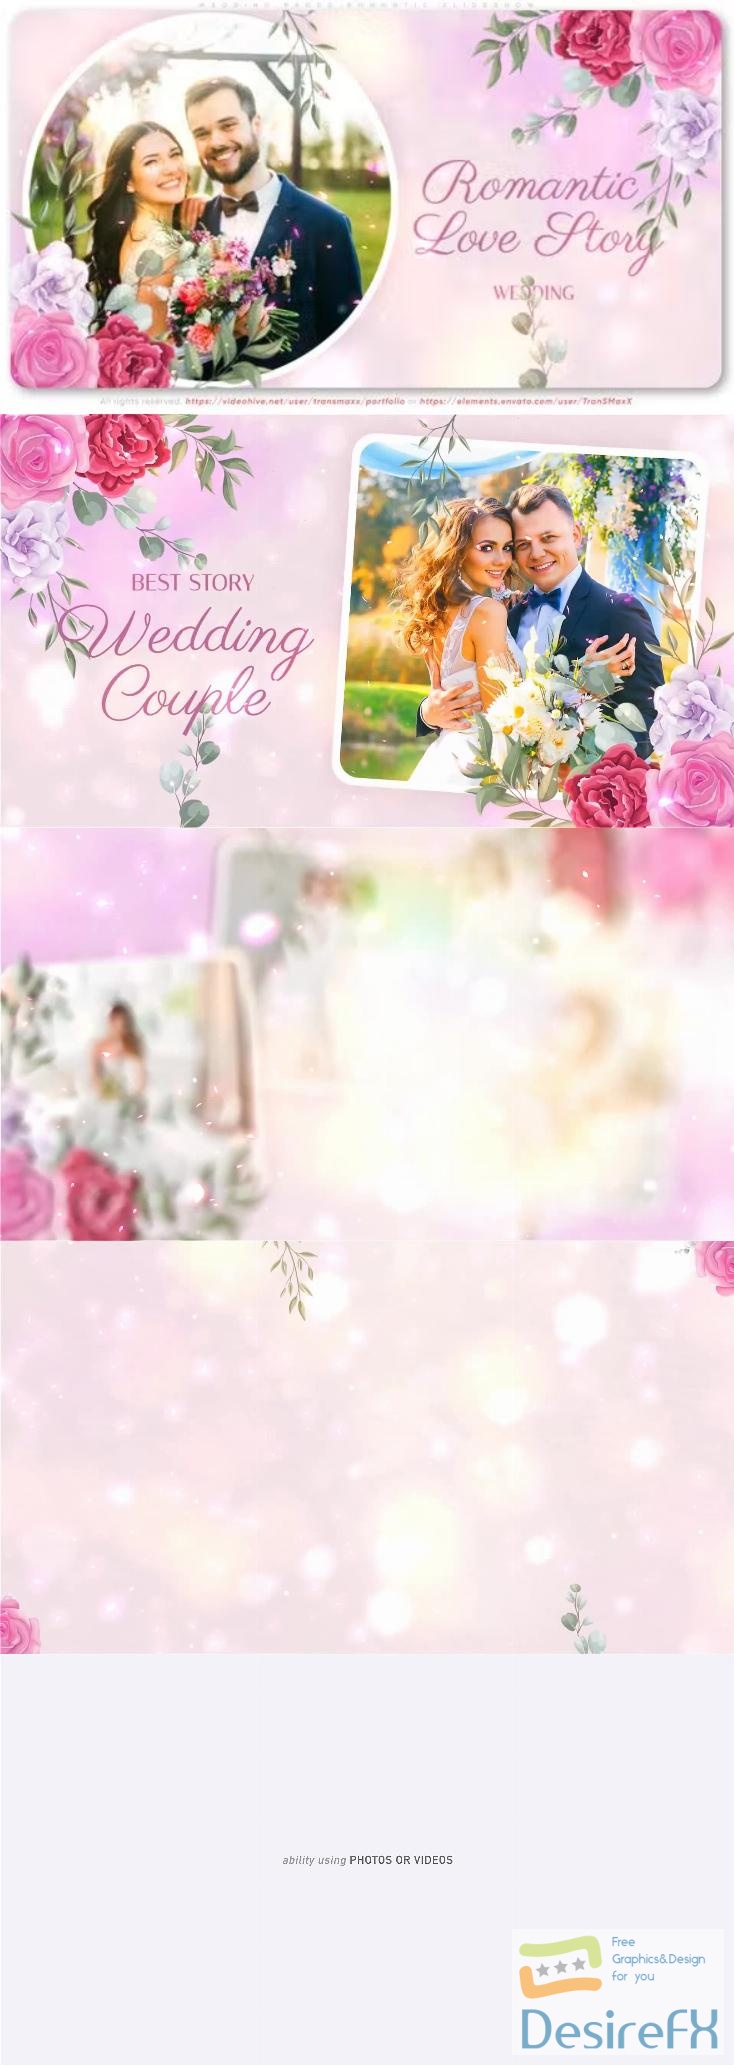 Videohive - Wedding Pages Romantic Slideshow - 38494501